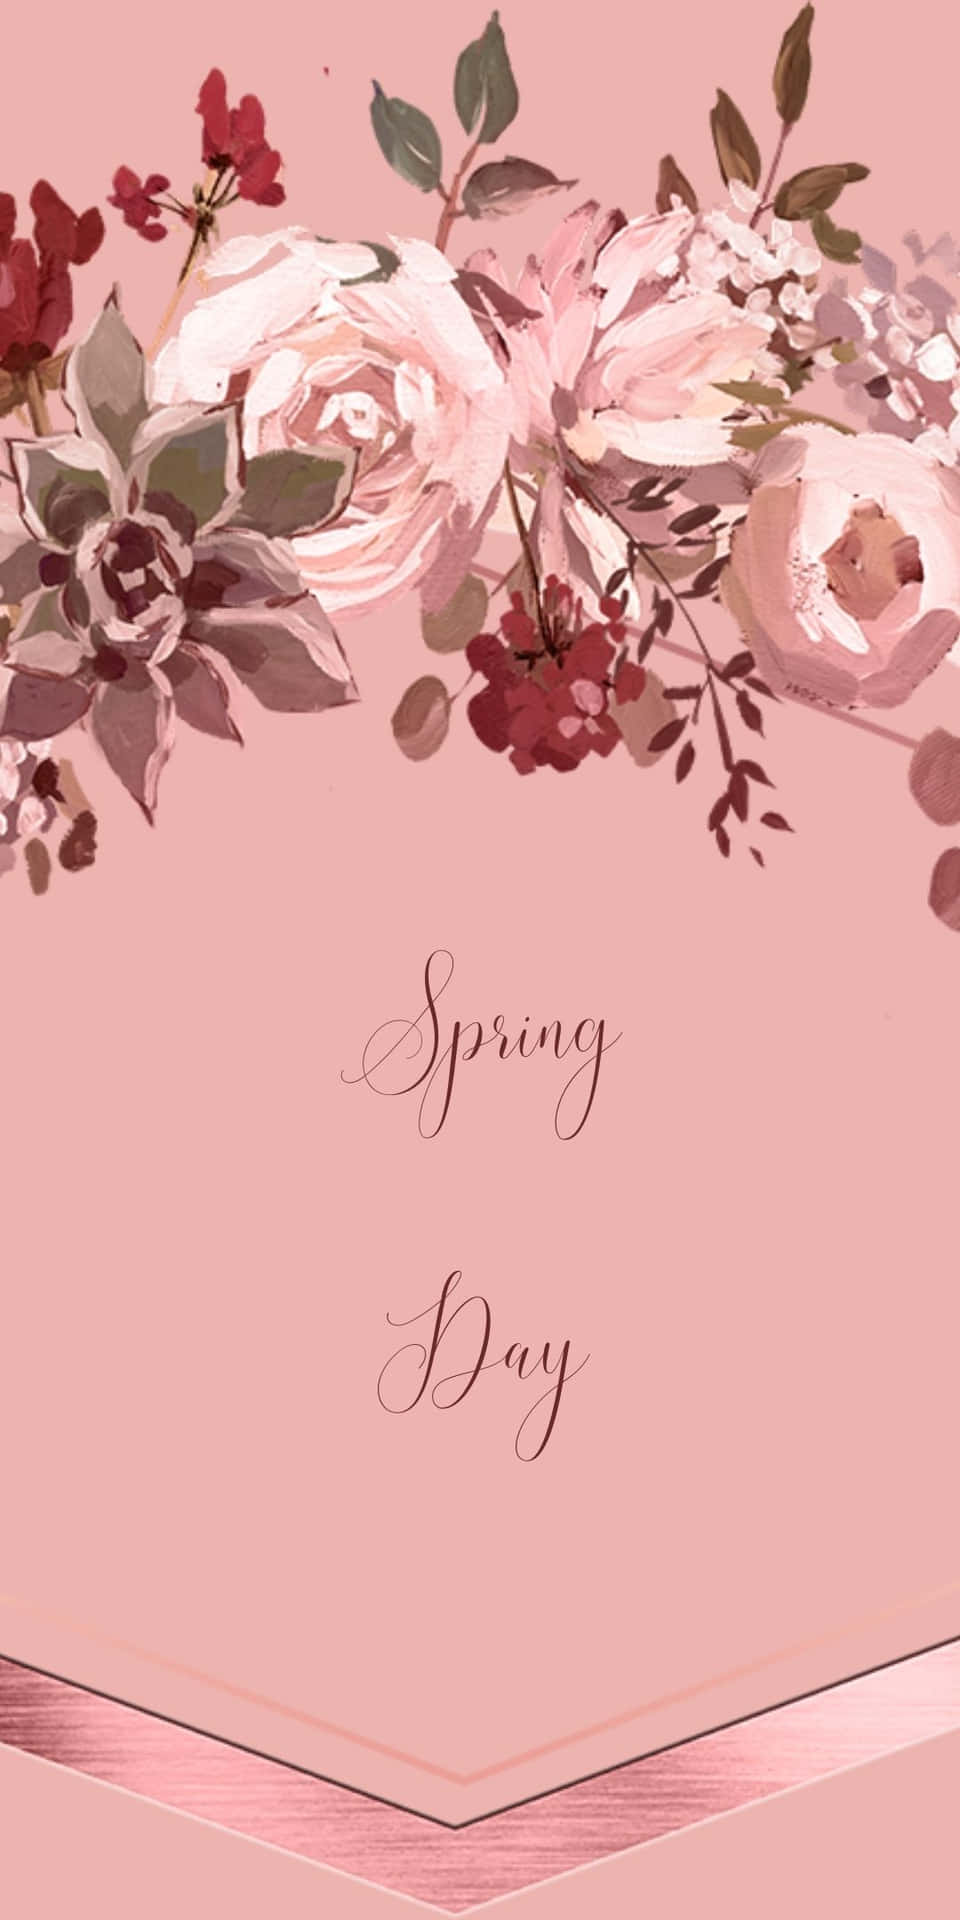 Enjoy the Beauty of Spring